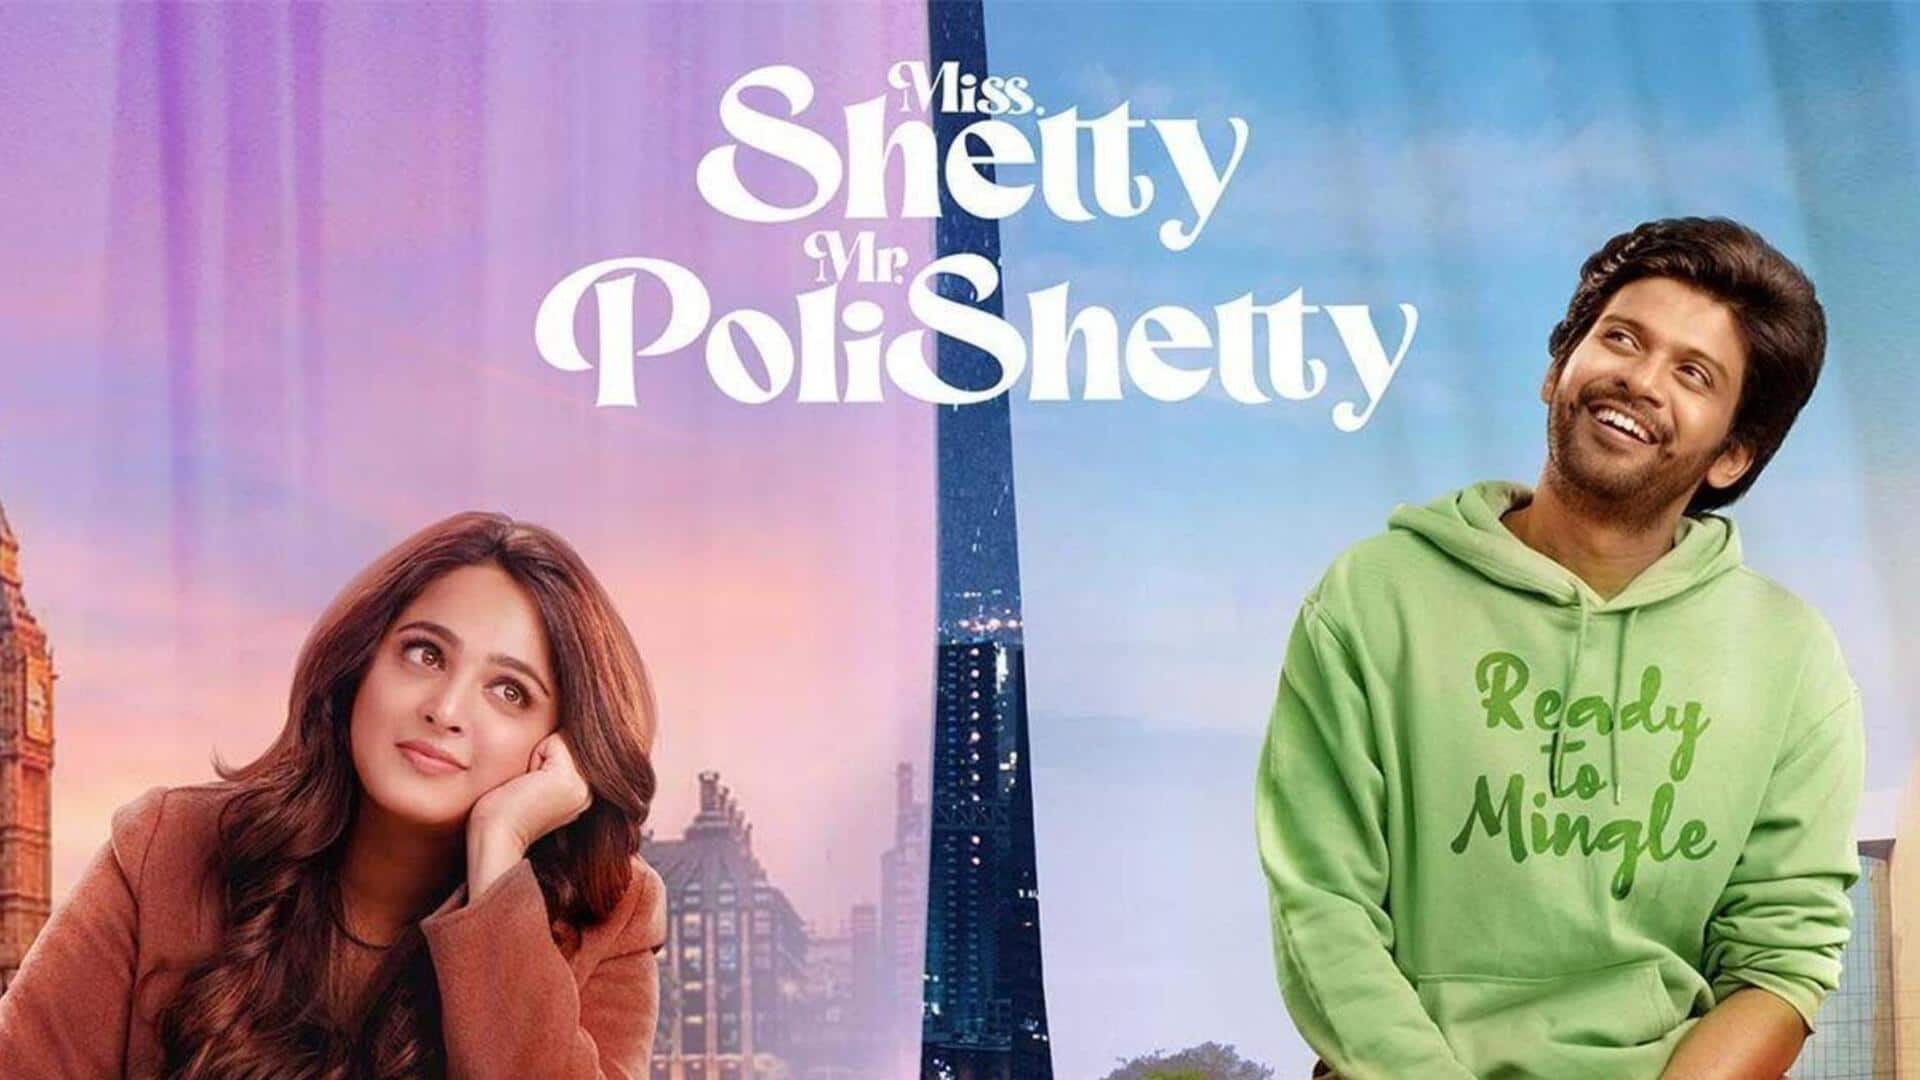 Box office collection: 'Miss Shetty Mr. Polishetty' is quite steady